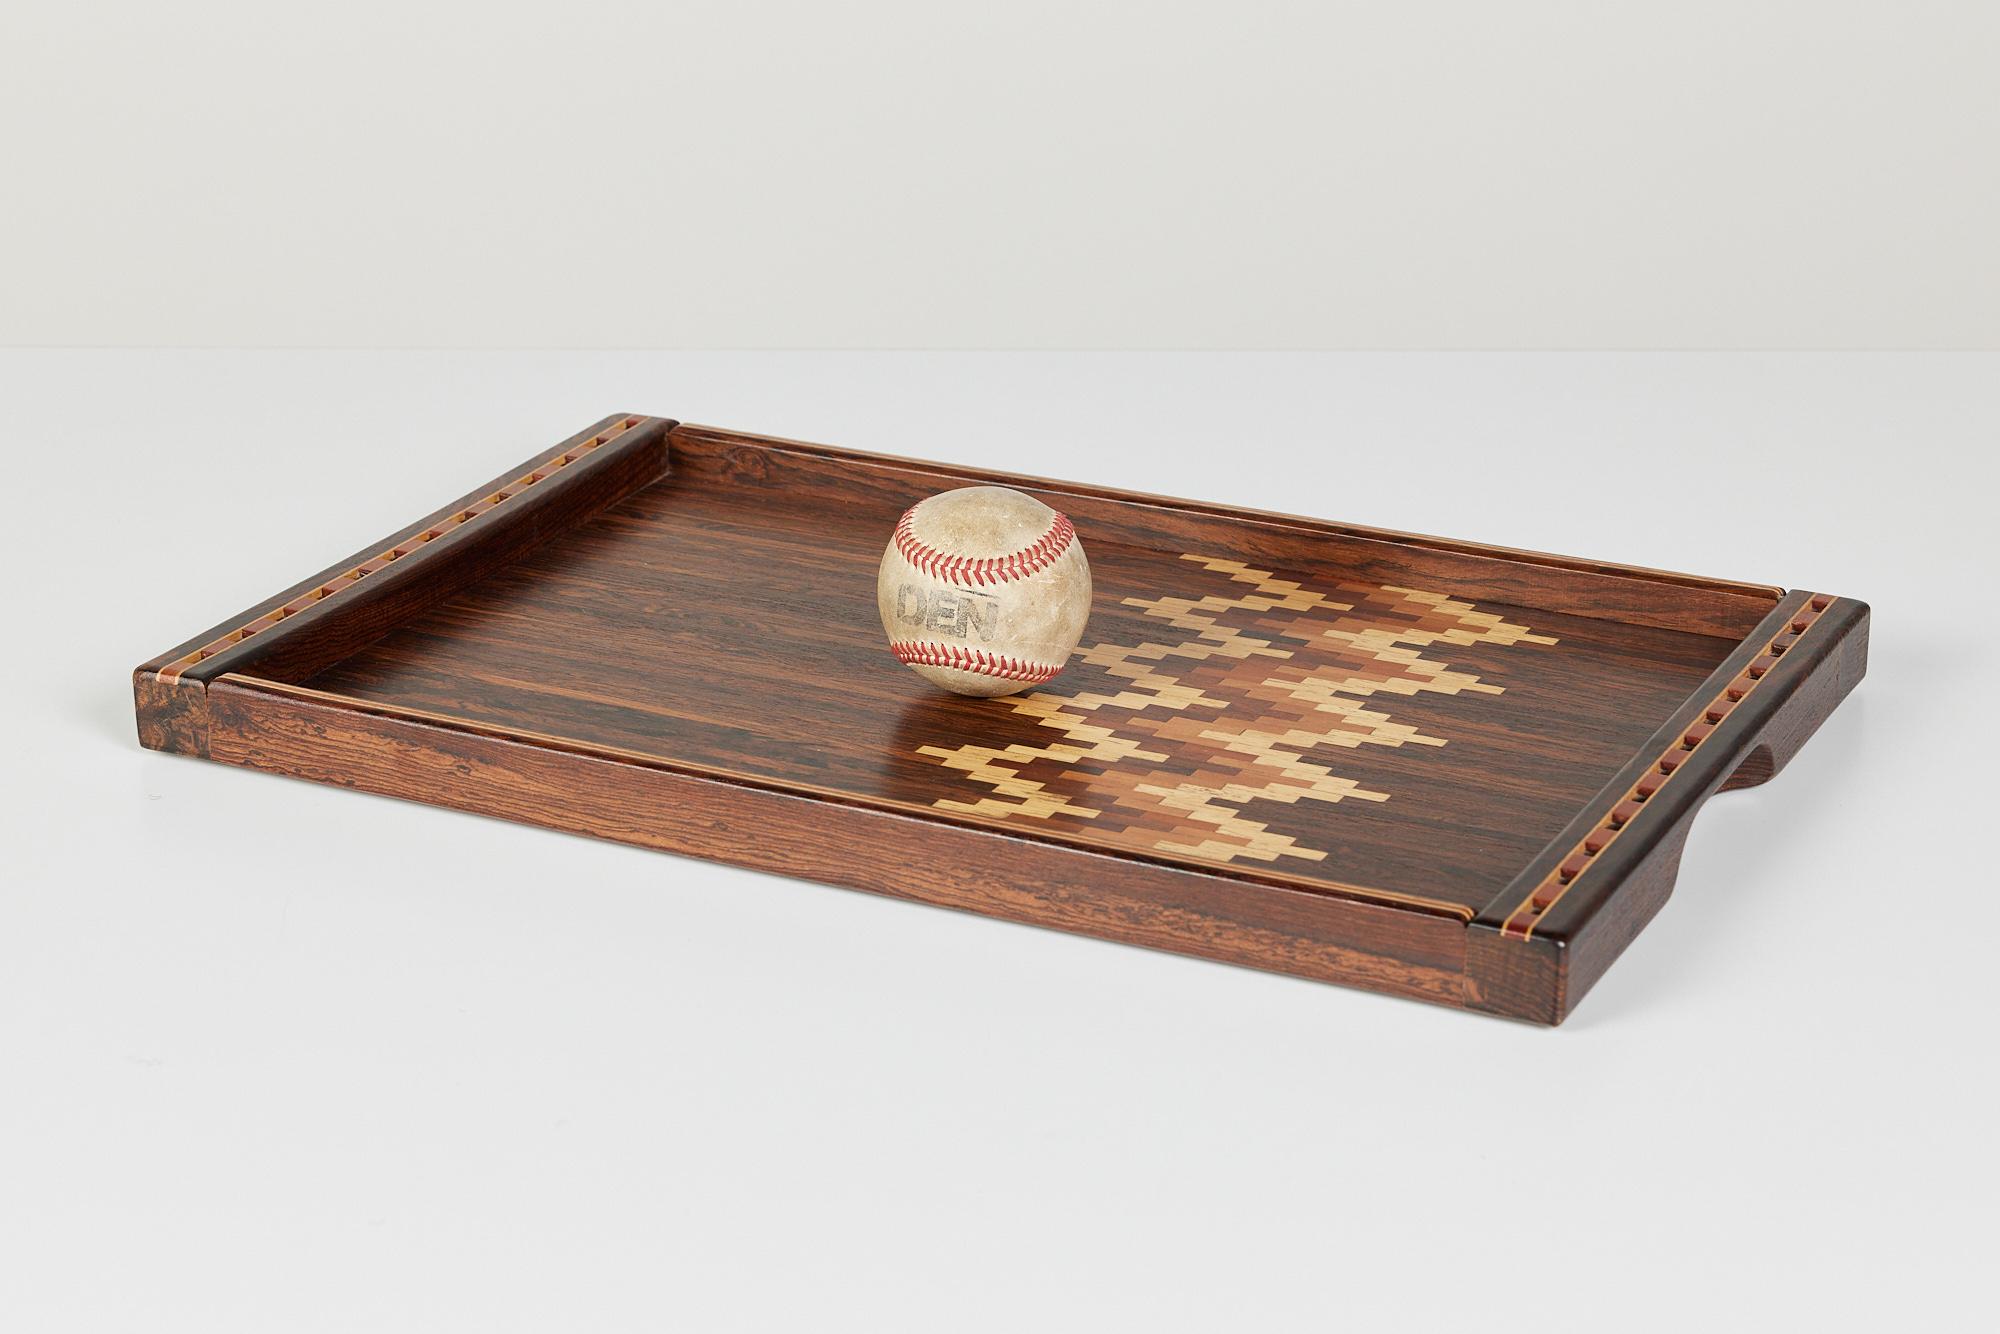 A rosewood serving tray with integrated handles by Don Shoemaker for his company Señal in the 1960s. The surface of the tray has a pixelated chevron-patterned parquet detail in exotic woods.

Label on bottom reads, “Designed by Don S. Shoemaker,